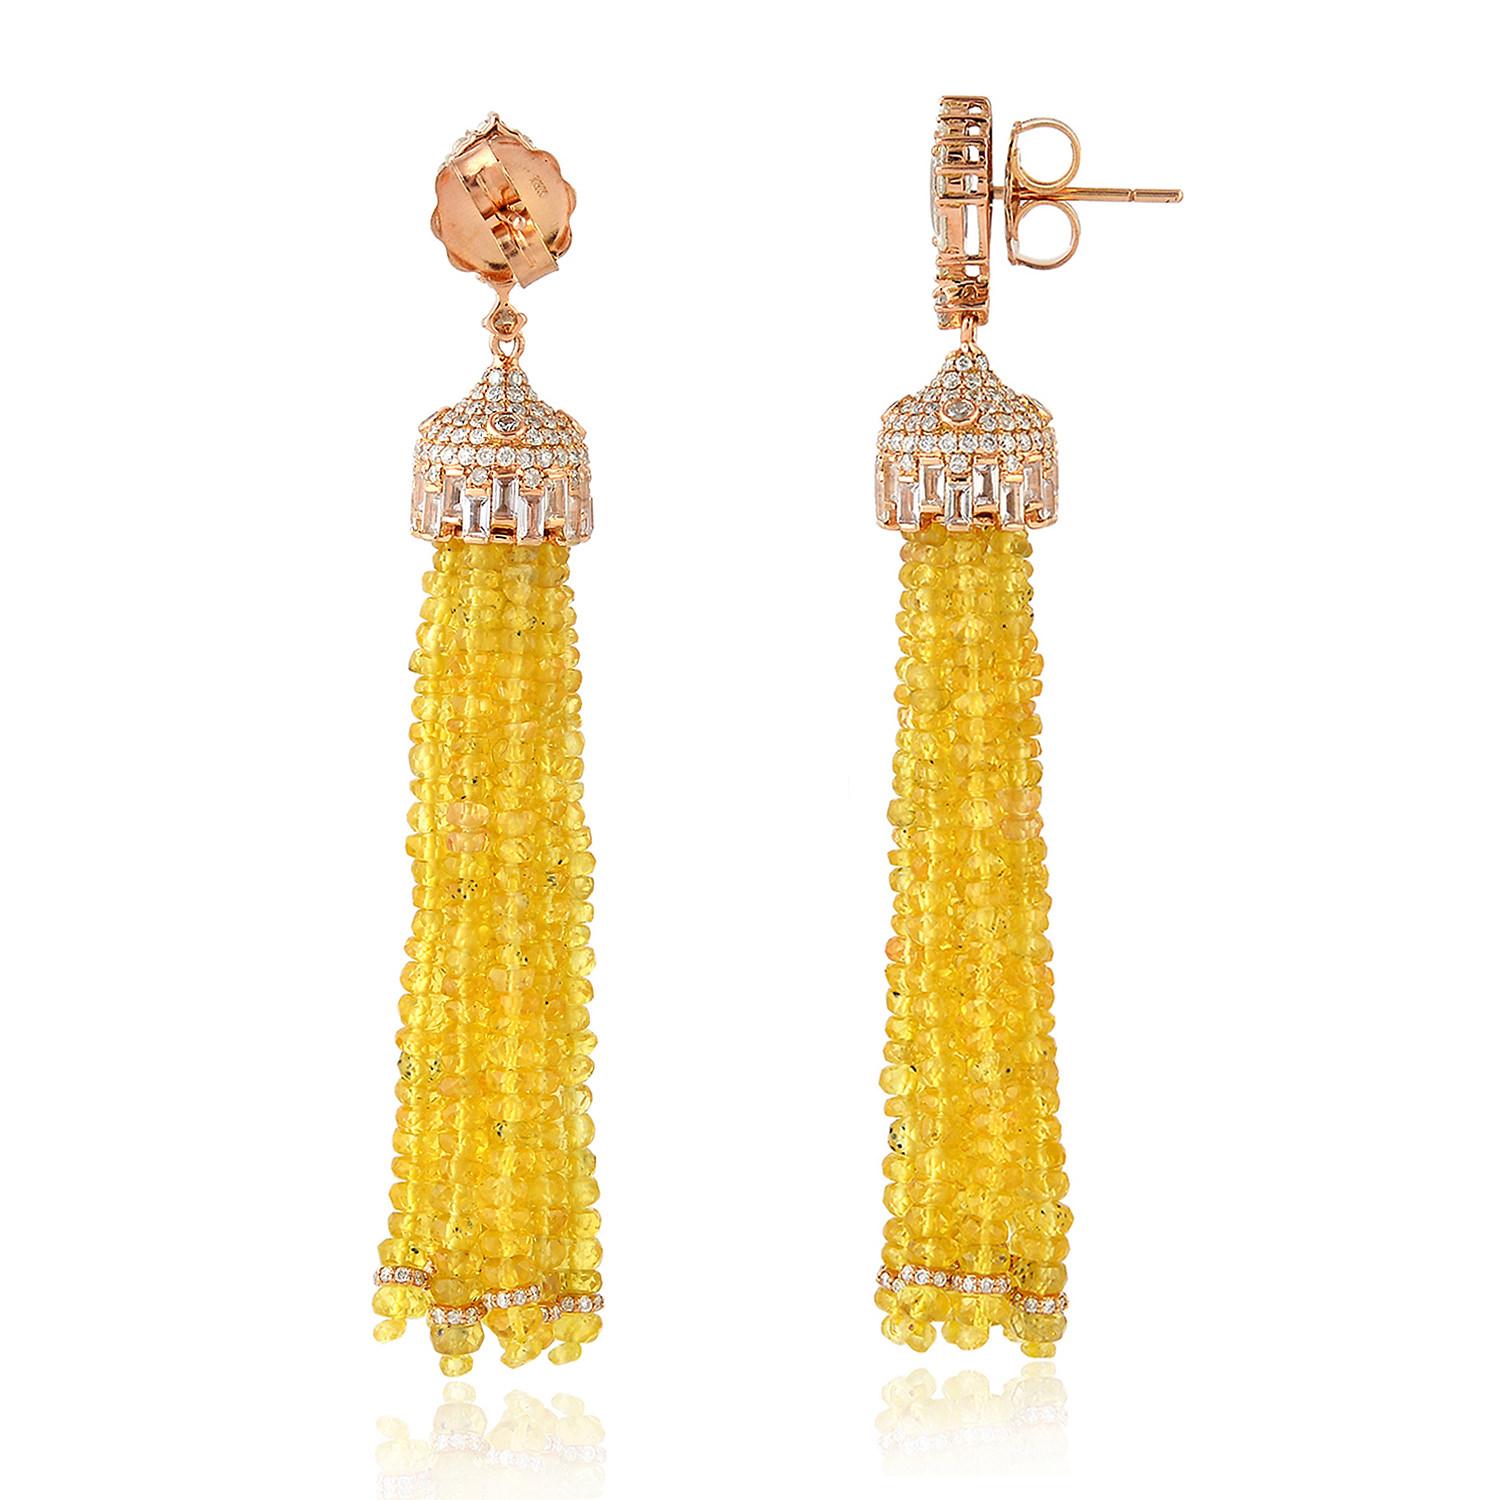 These stunning tassel earrings are handmade in 18-karat gold. It is set in 90.11 carats yellow sapphire and 2.73 carats of glittering diamonds. 

FOLLOW  MEGHNA JEWELS storefront to view the latest collection & exclusive pieces.  Meghna Jewels is